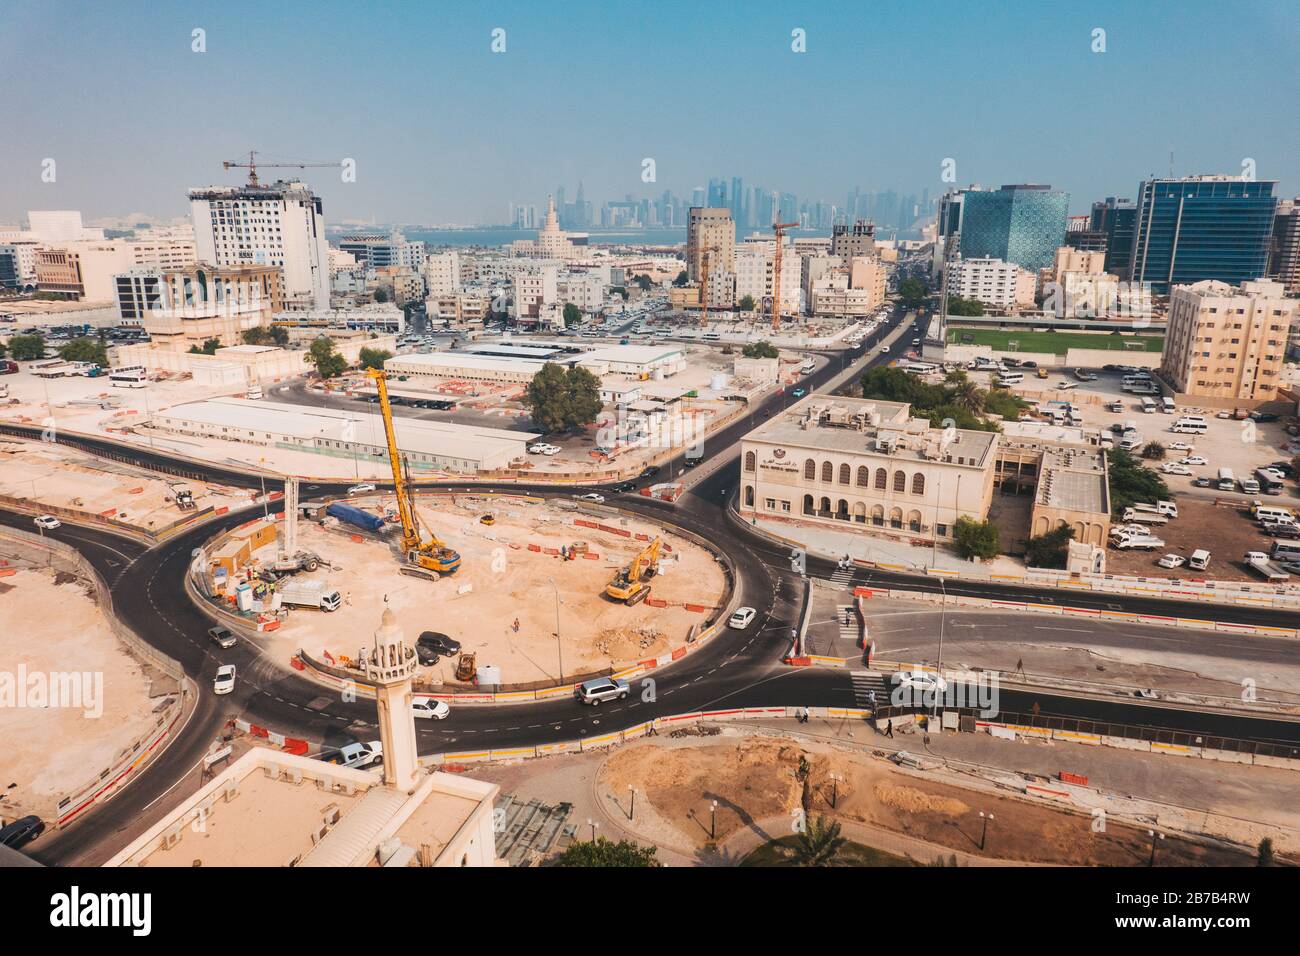 Aerial view of a new roundabout under construction in Doha, Qatar Stock Photo